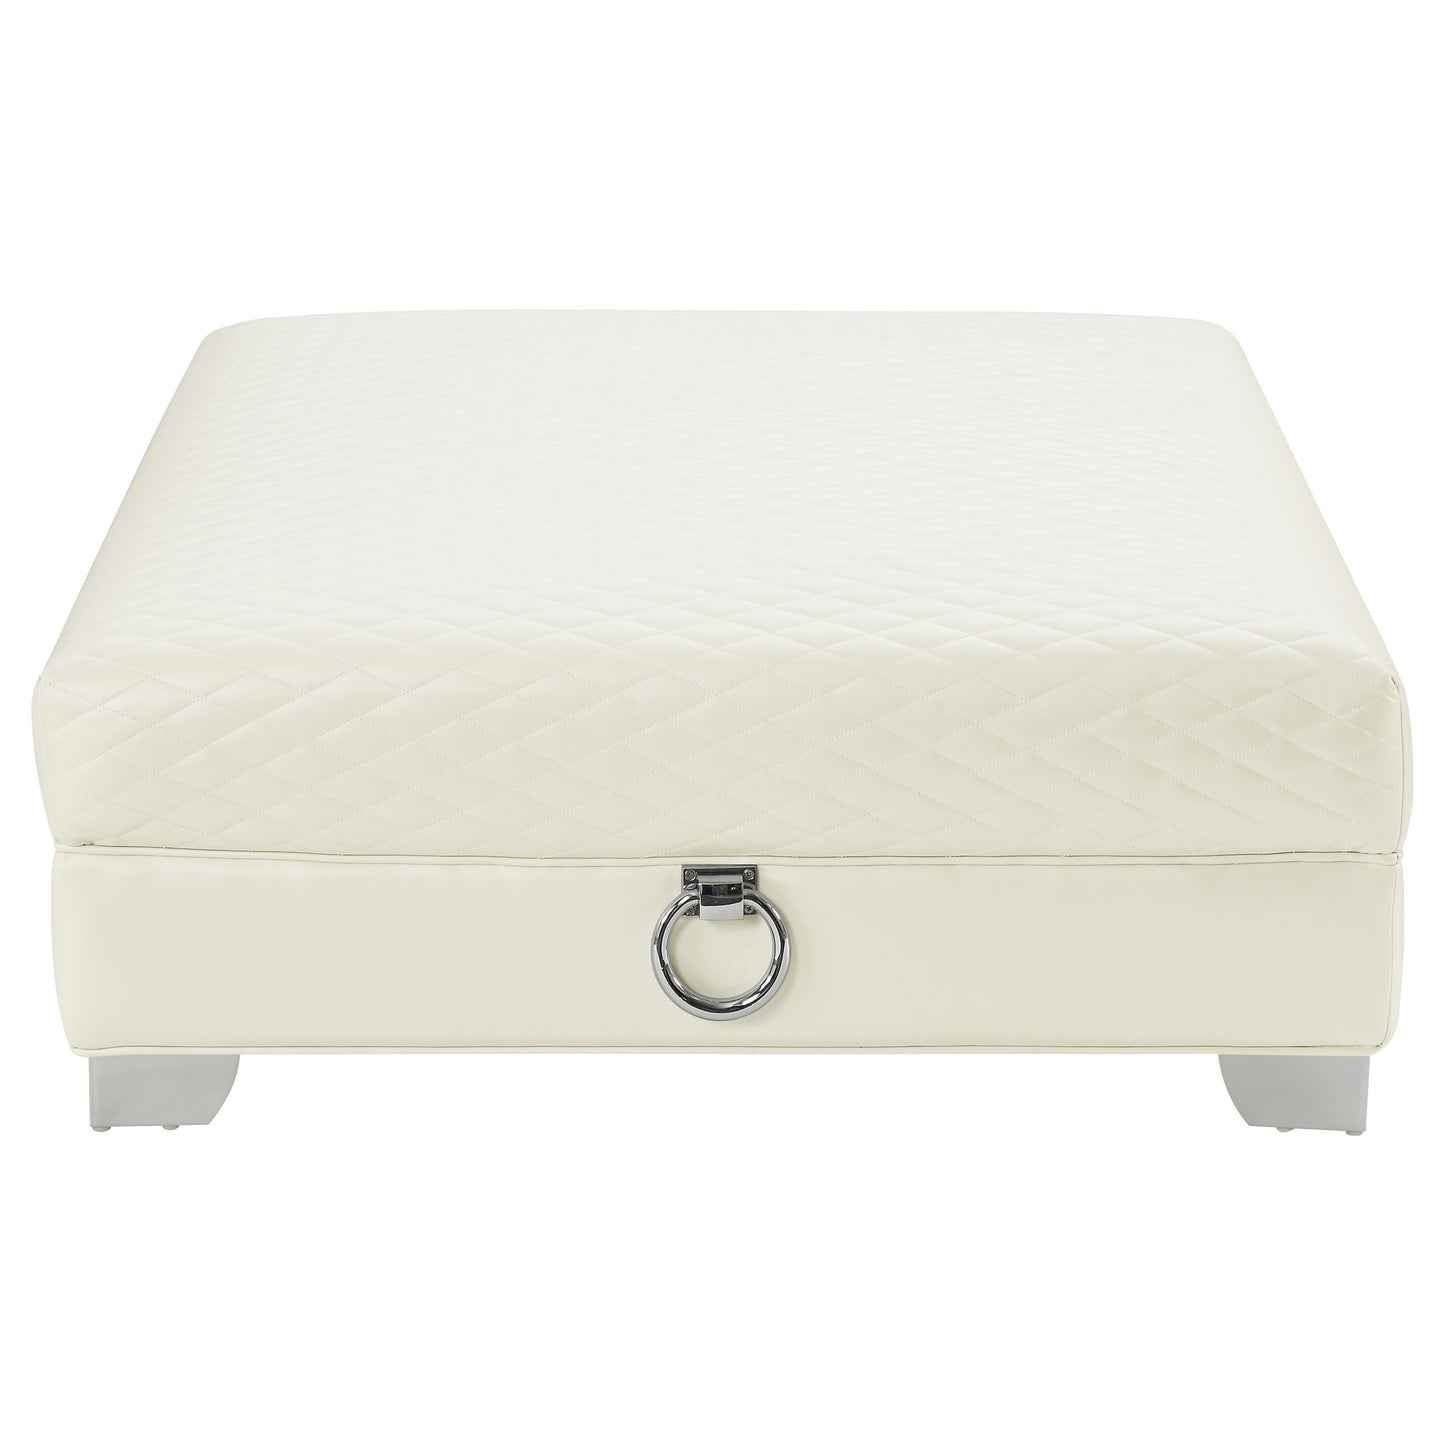 Chaviano Upholstered Ottoman Pearl White